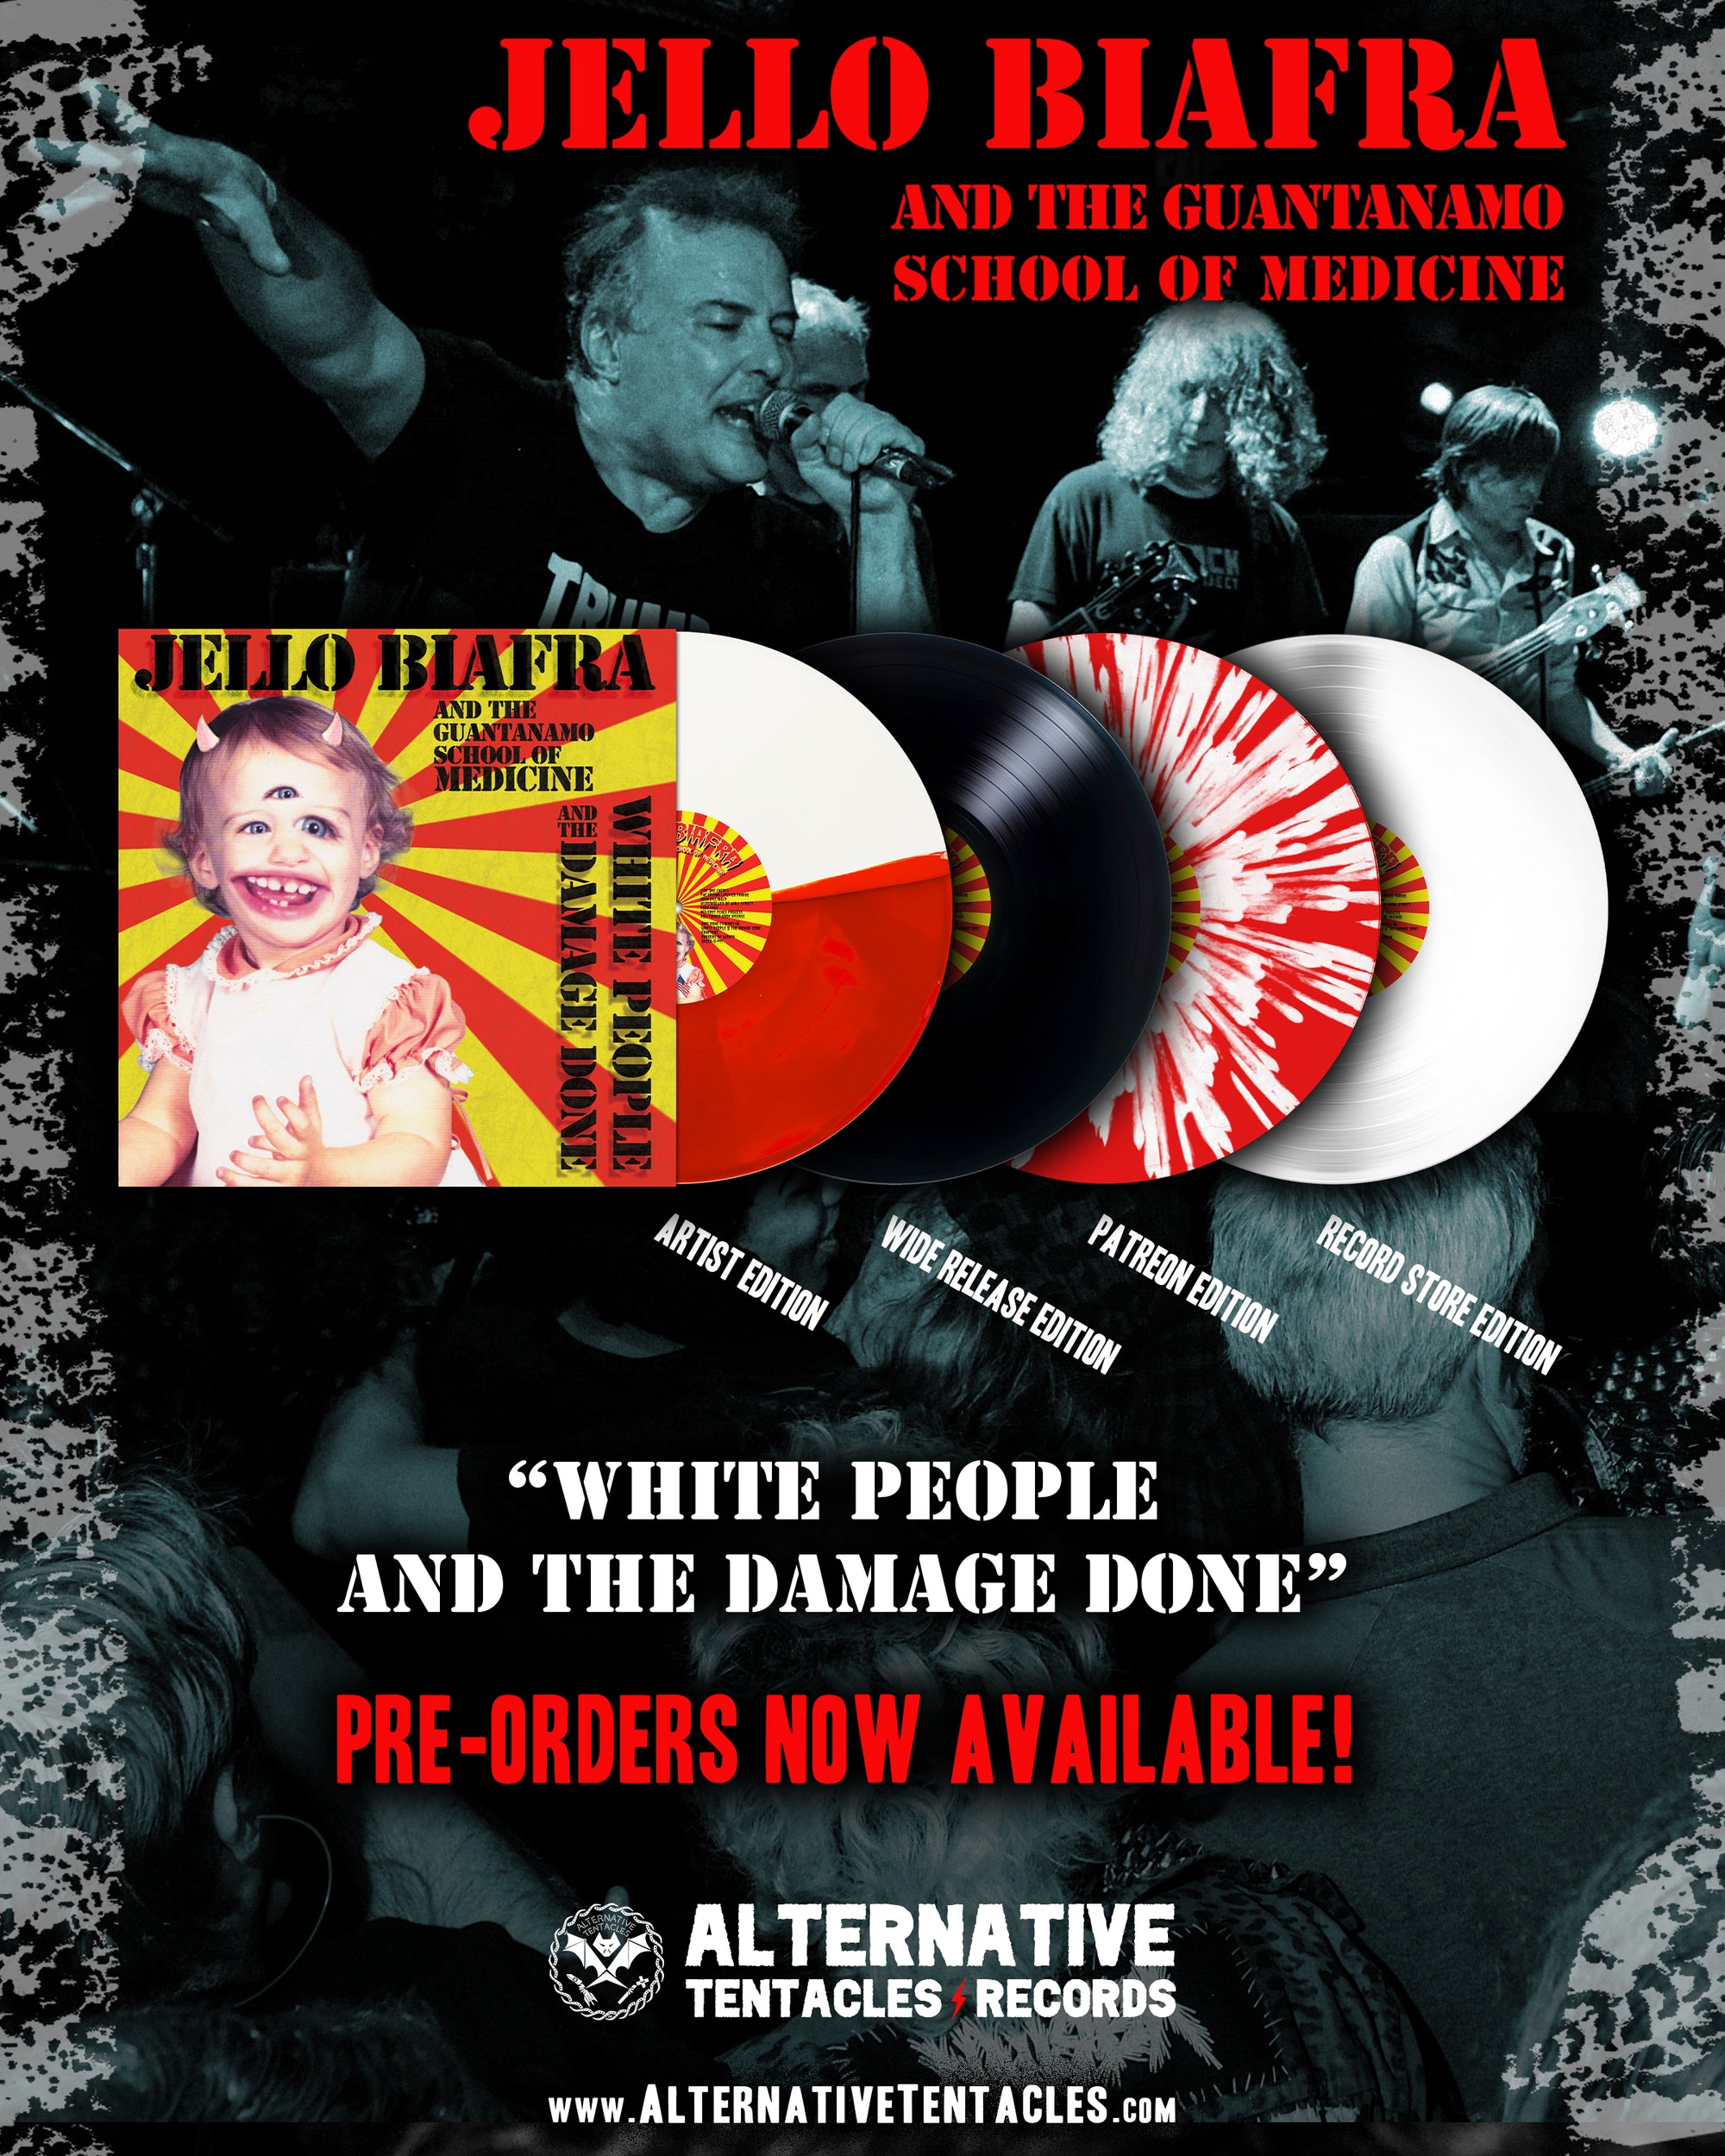 PRE-ORDER LIMITED EDITIONS OF JELLO BIAFRA’S “WHITE PEOPLE AND THE DAMAGE DONE”